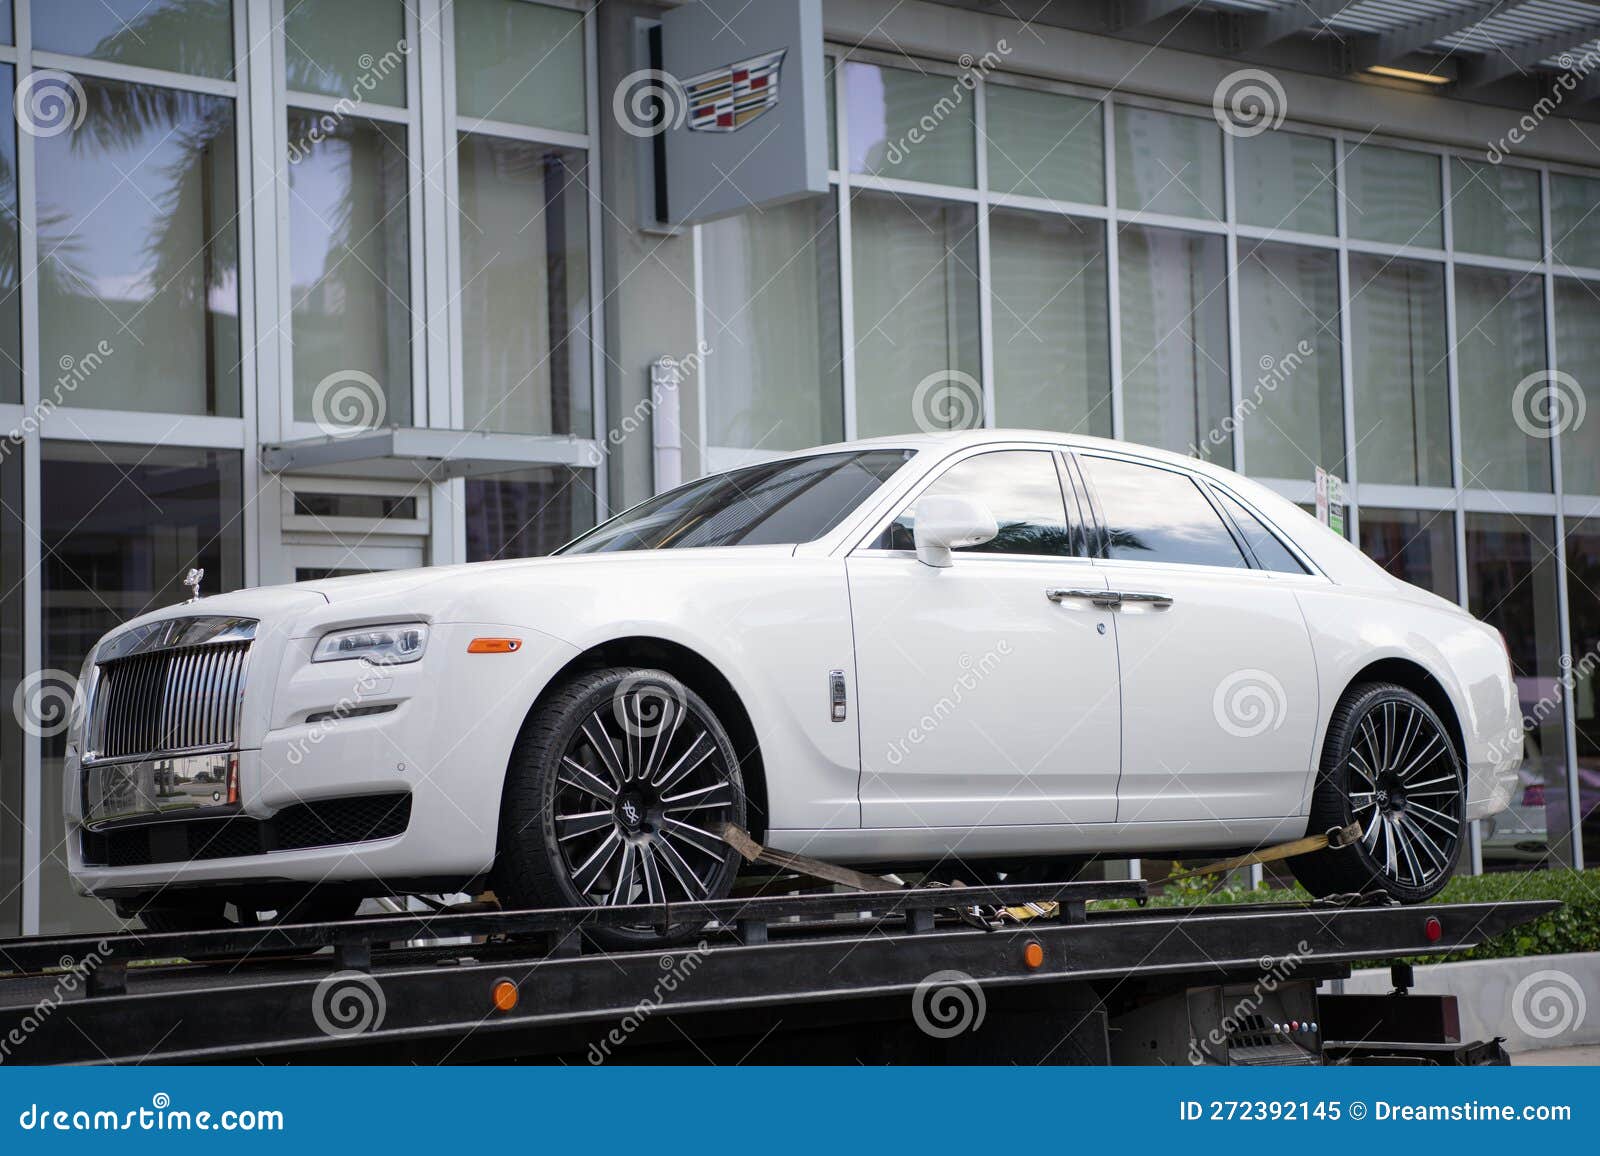 New RollsRoyce Ghost unveiled  carsalescomau